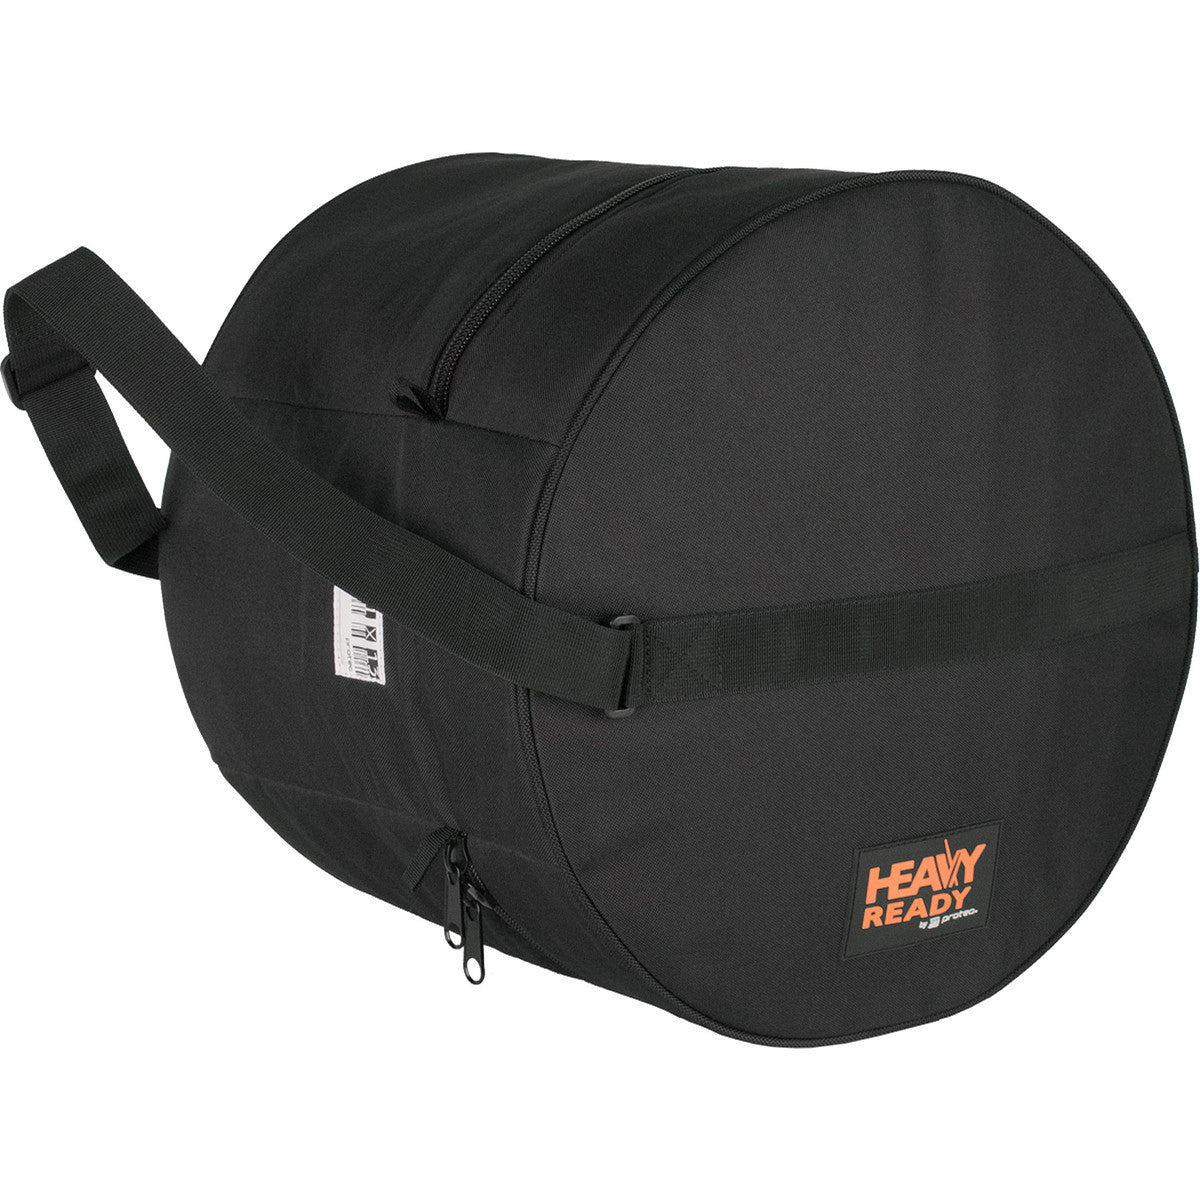 Protec Heavy Ready Series Drum Bag, Tom 11"H x 13"D (HR1113) Cymbal & Drum Cases Protec 